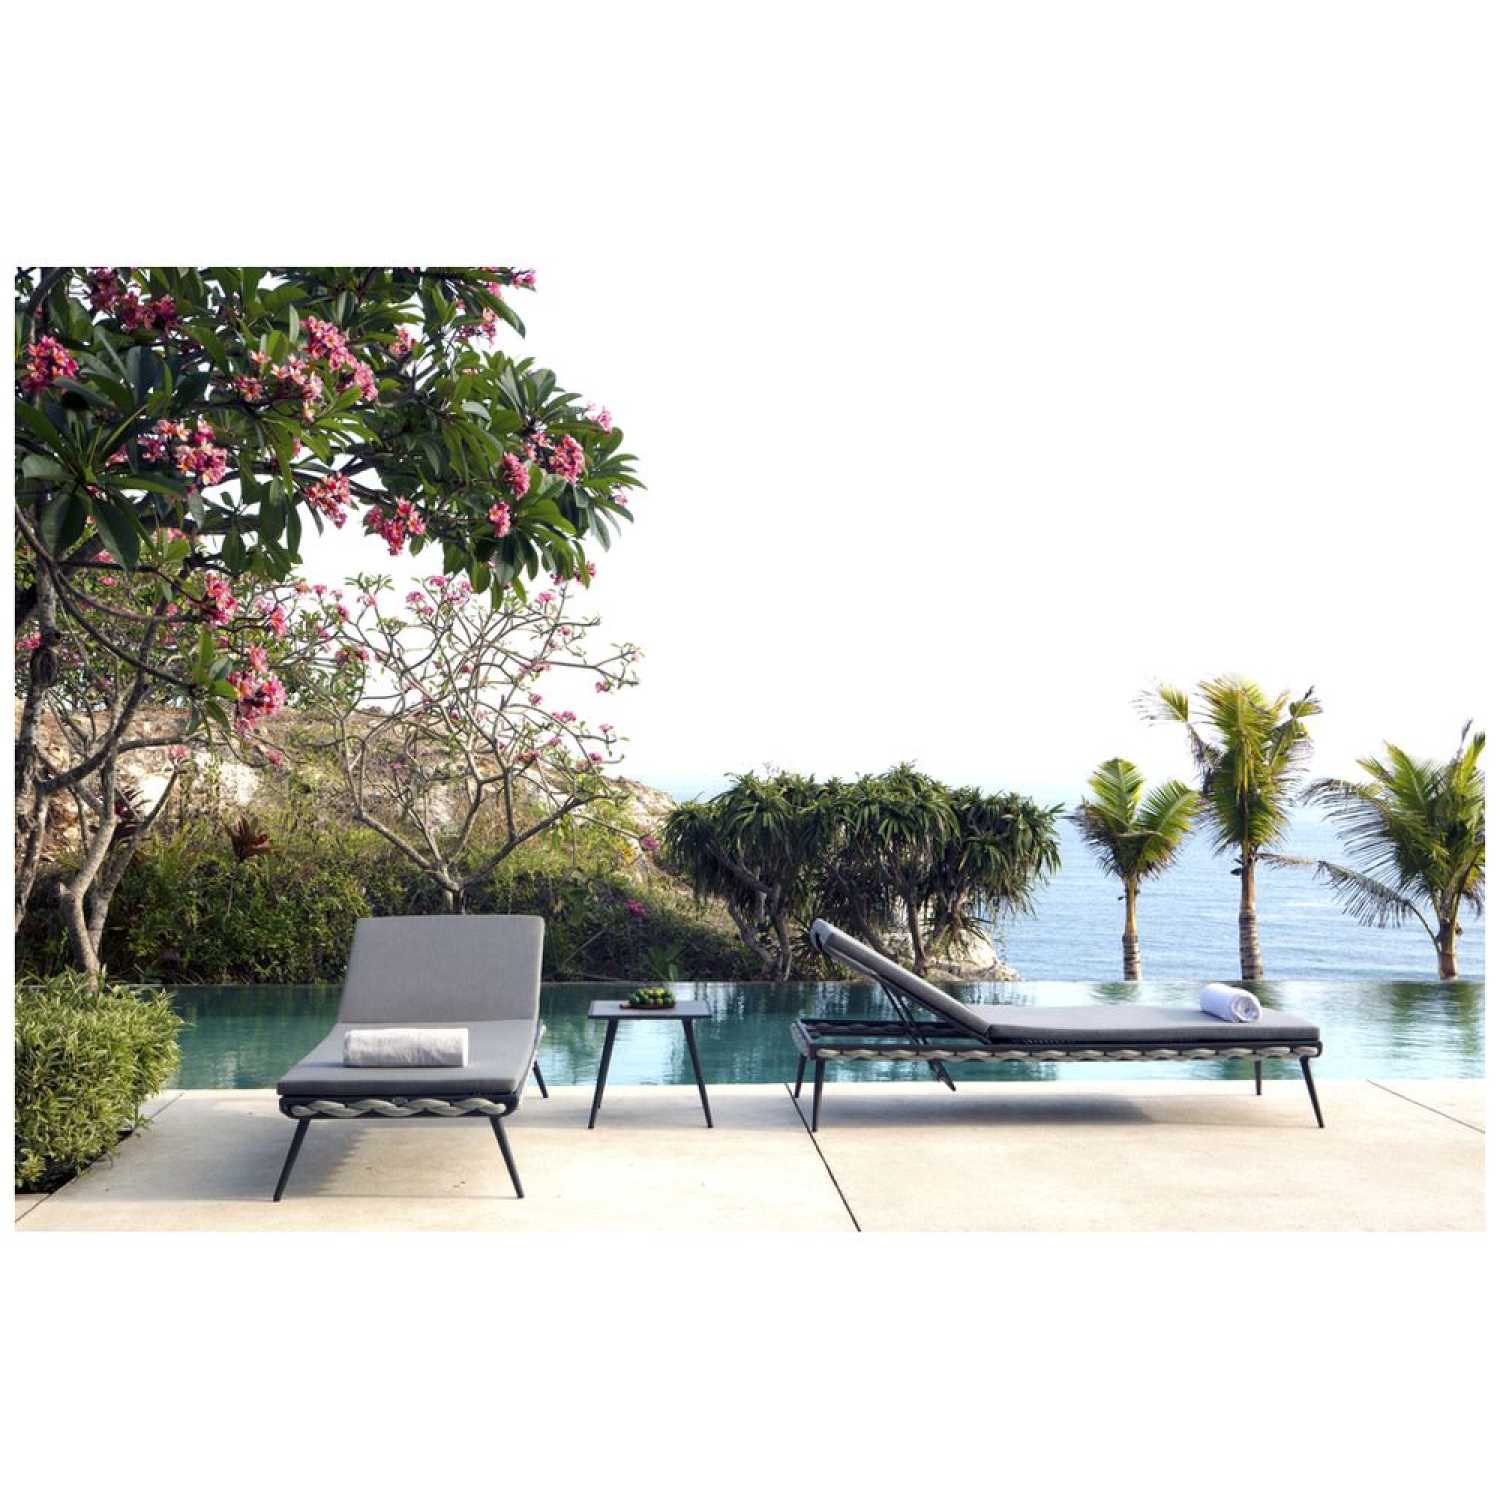 Serpent Lounger - PadioLiving - Serpent Lounger - Outdoor Lounger - PadioLiving